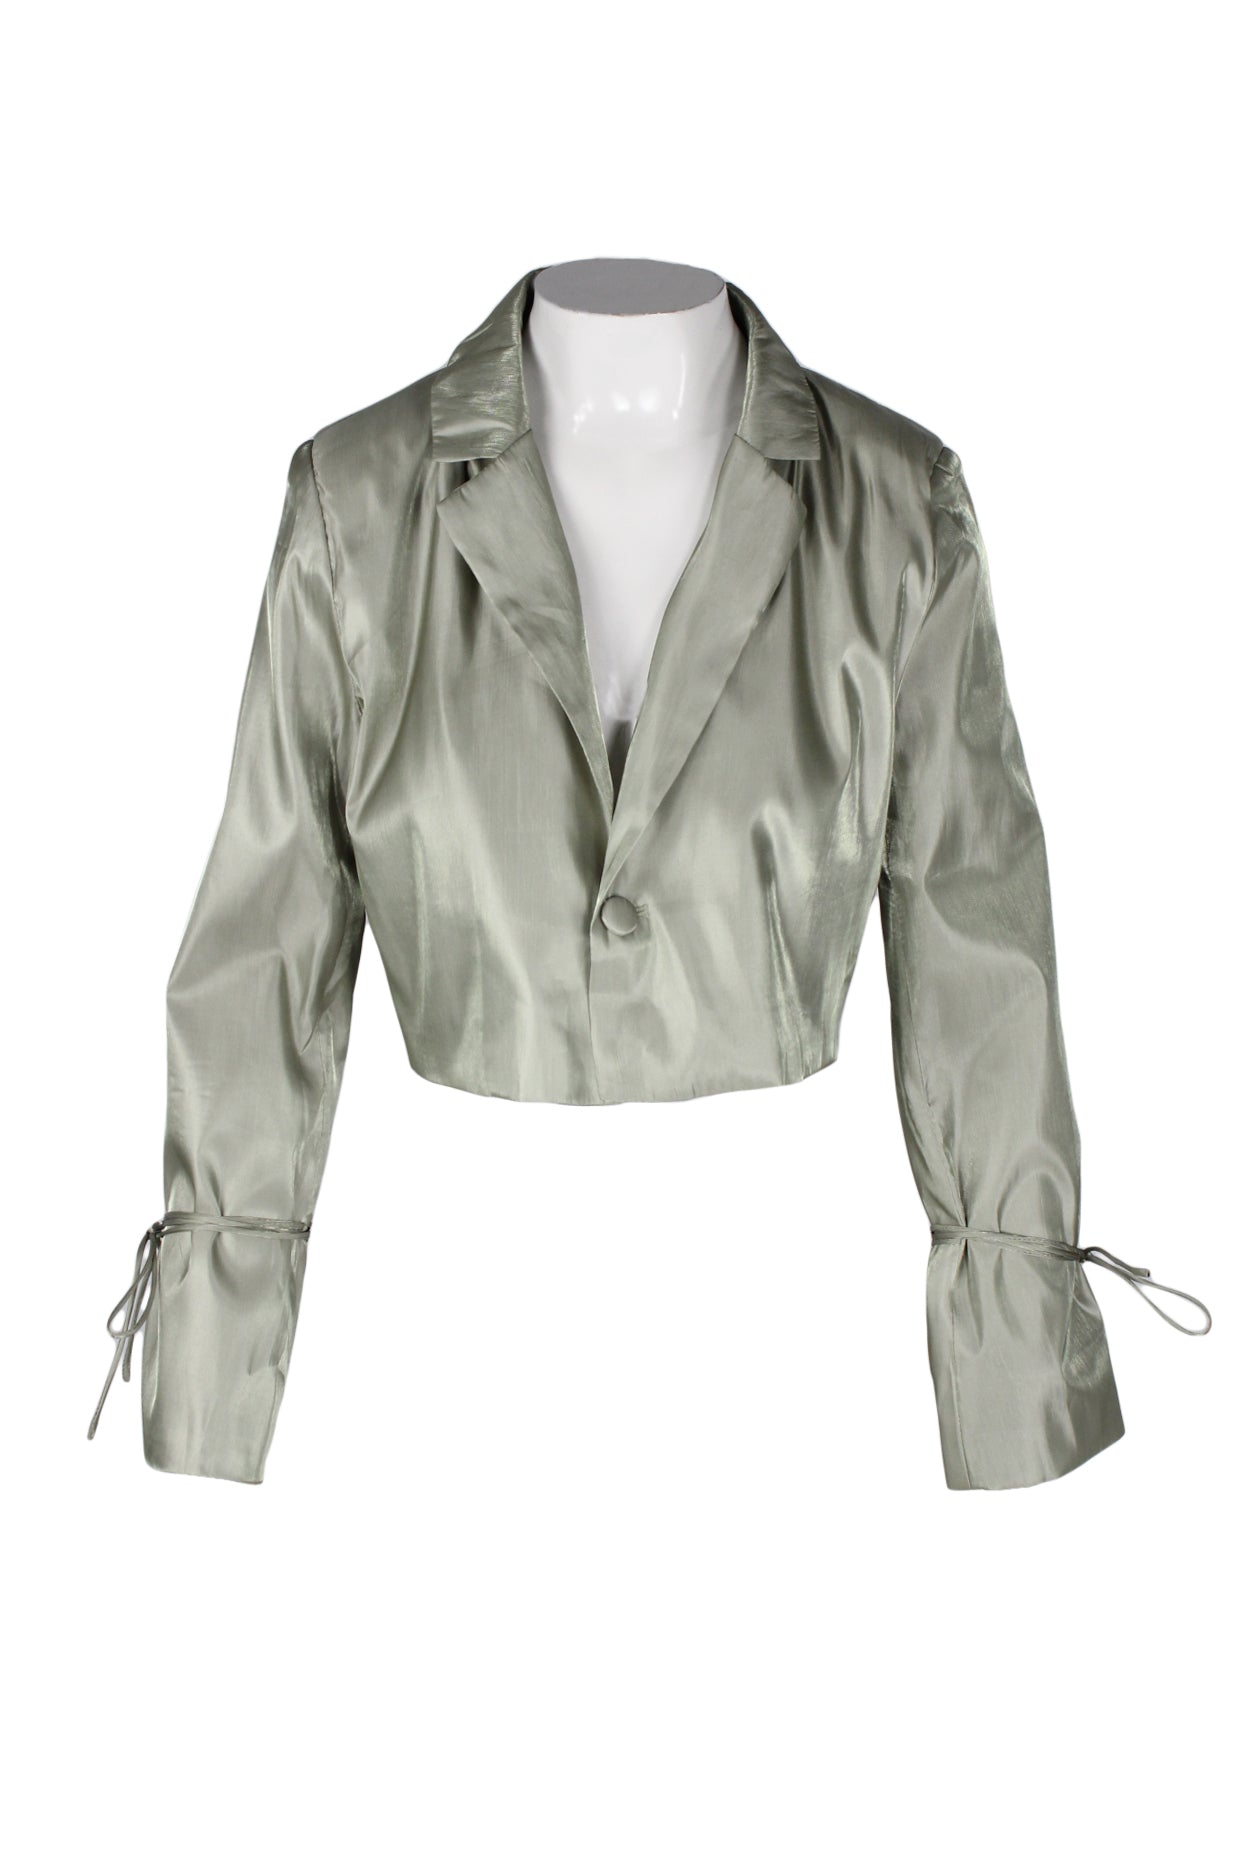 description: nasty gal collection satin shimmer green cropped blazer. features lapel collar, single button closure at front, and tie detailing at sleeves. 